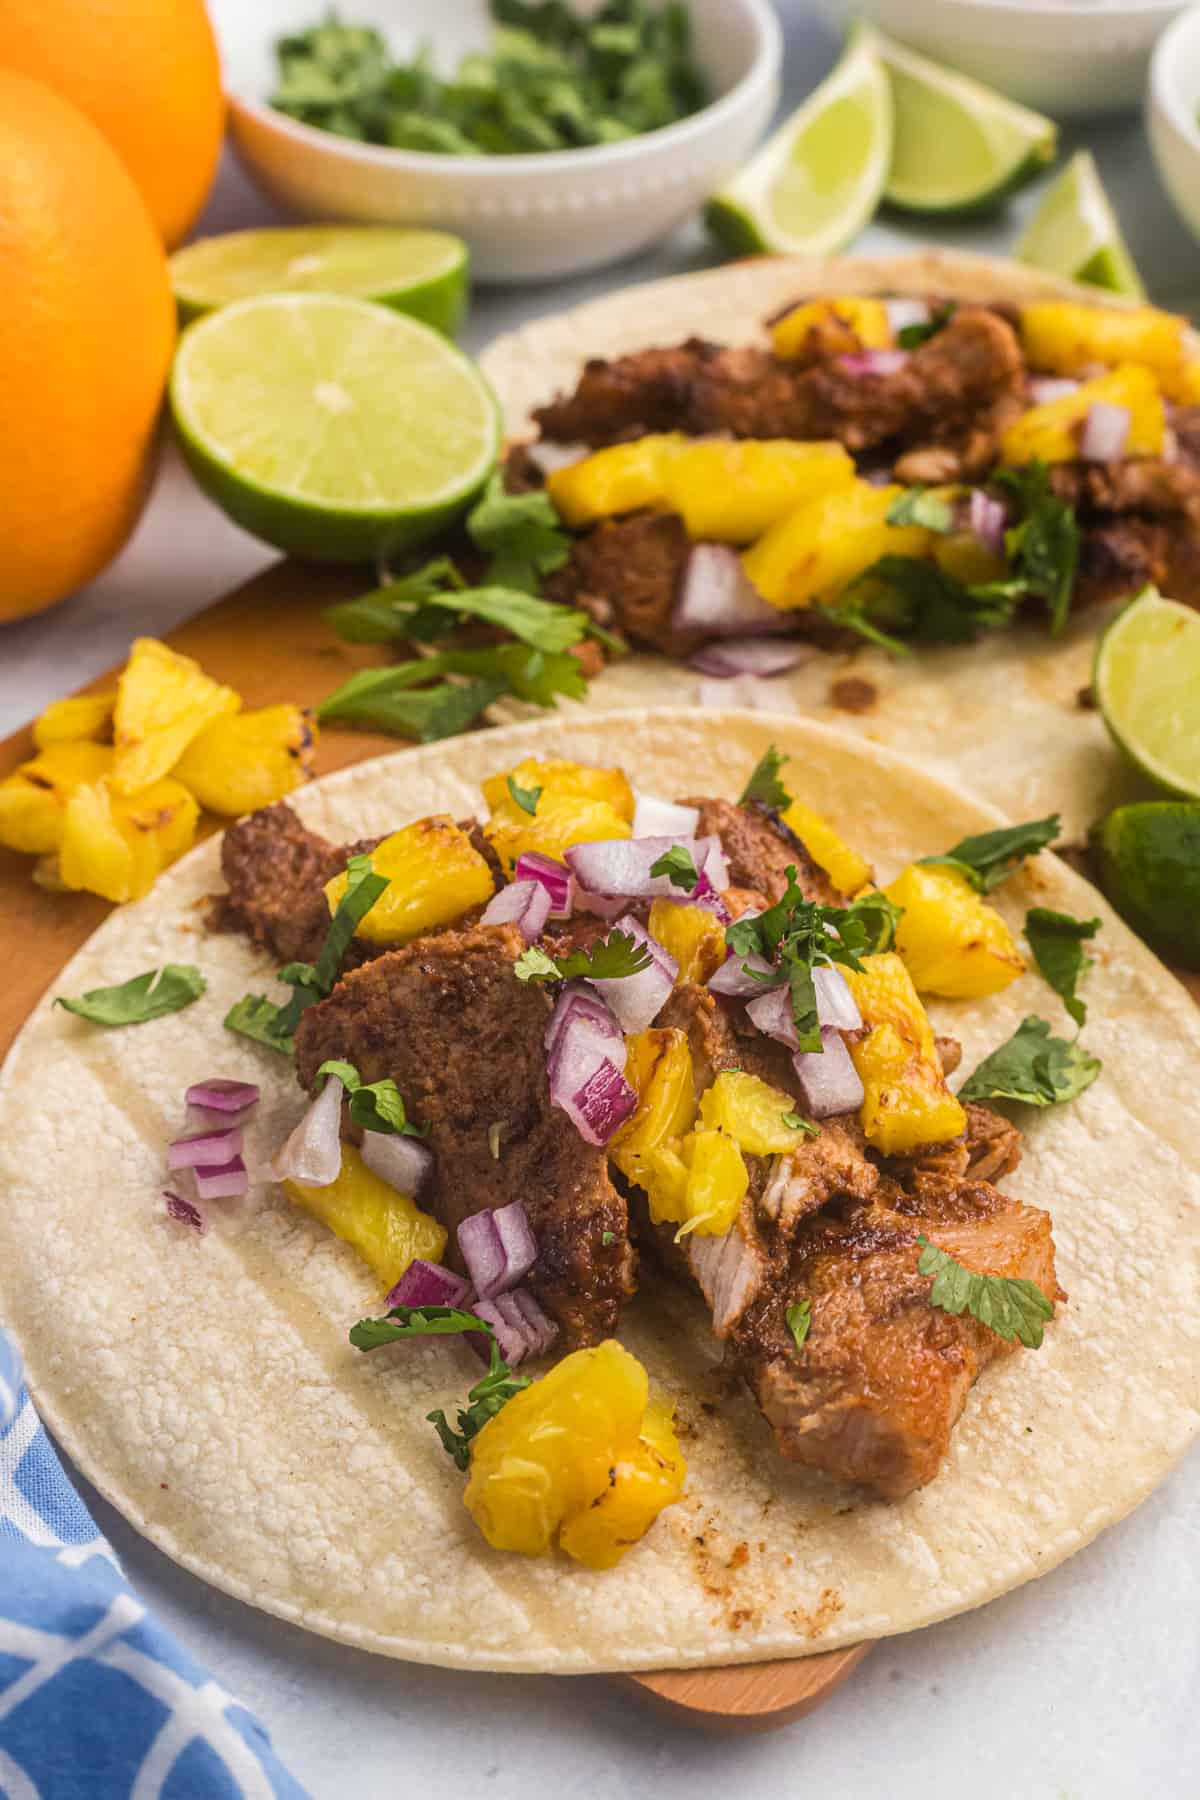 A corn tortilla is filled with cooked meat and pineapple salsa.